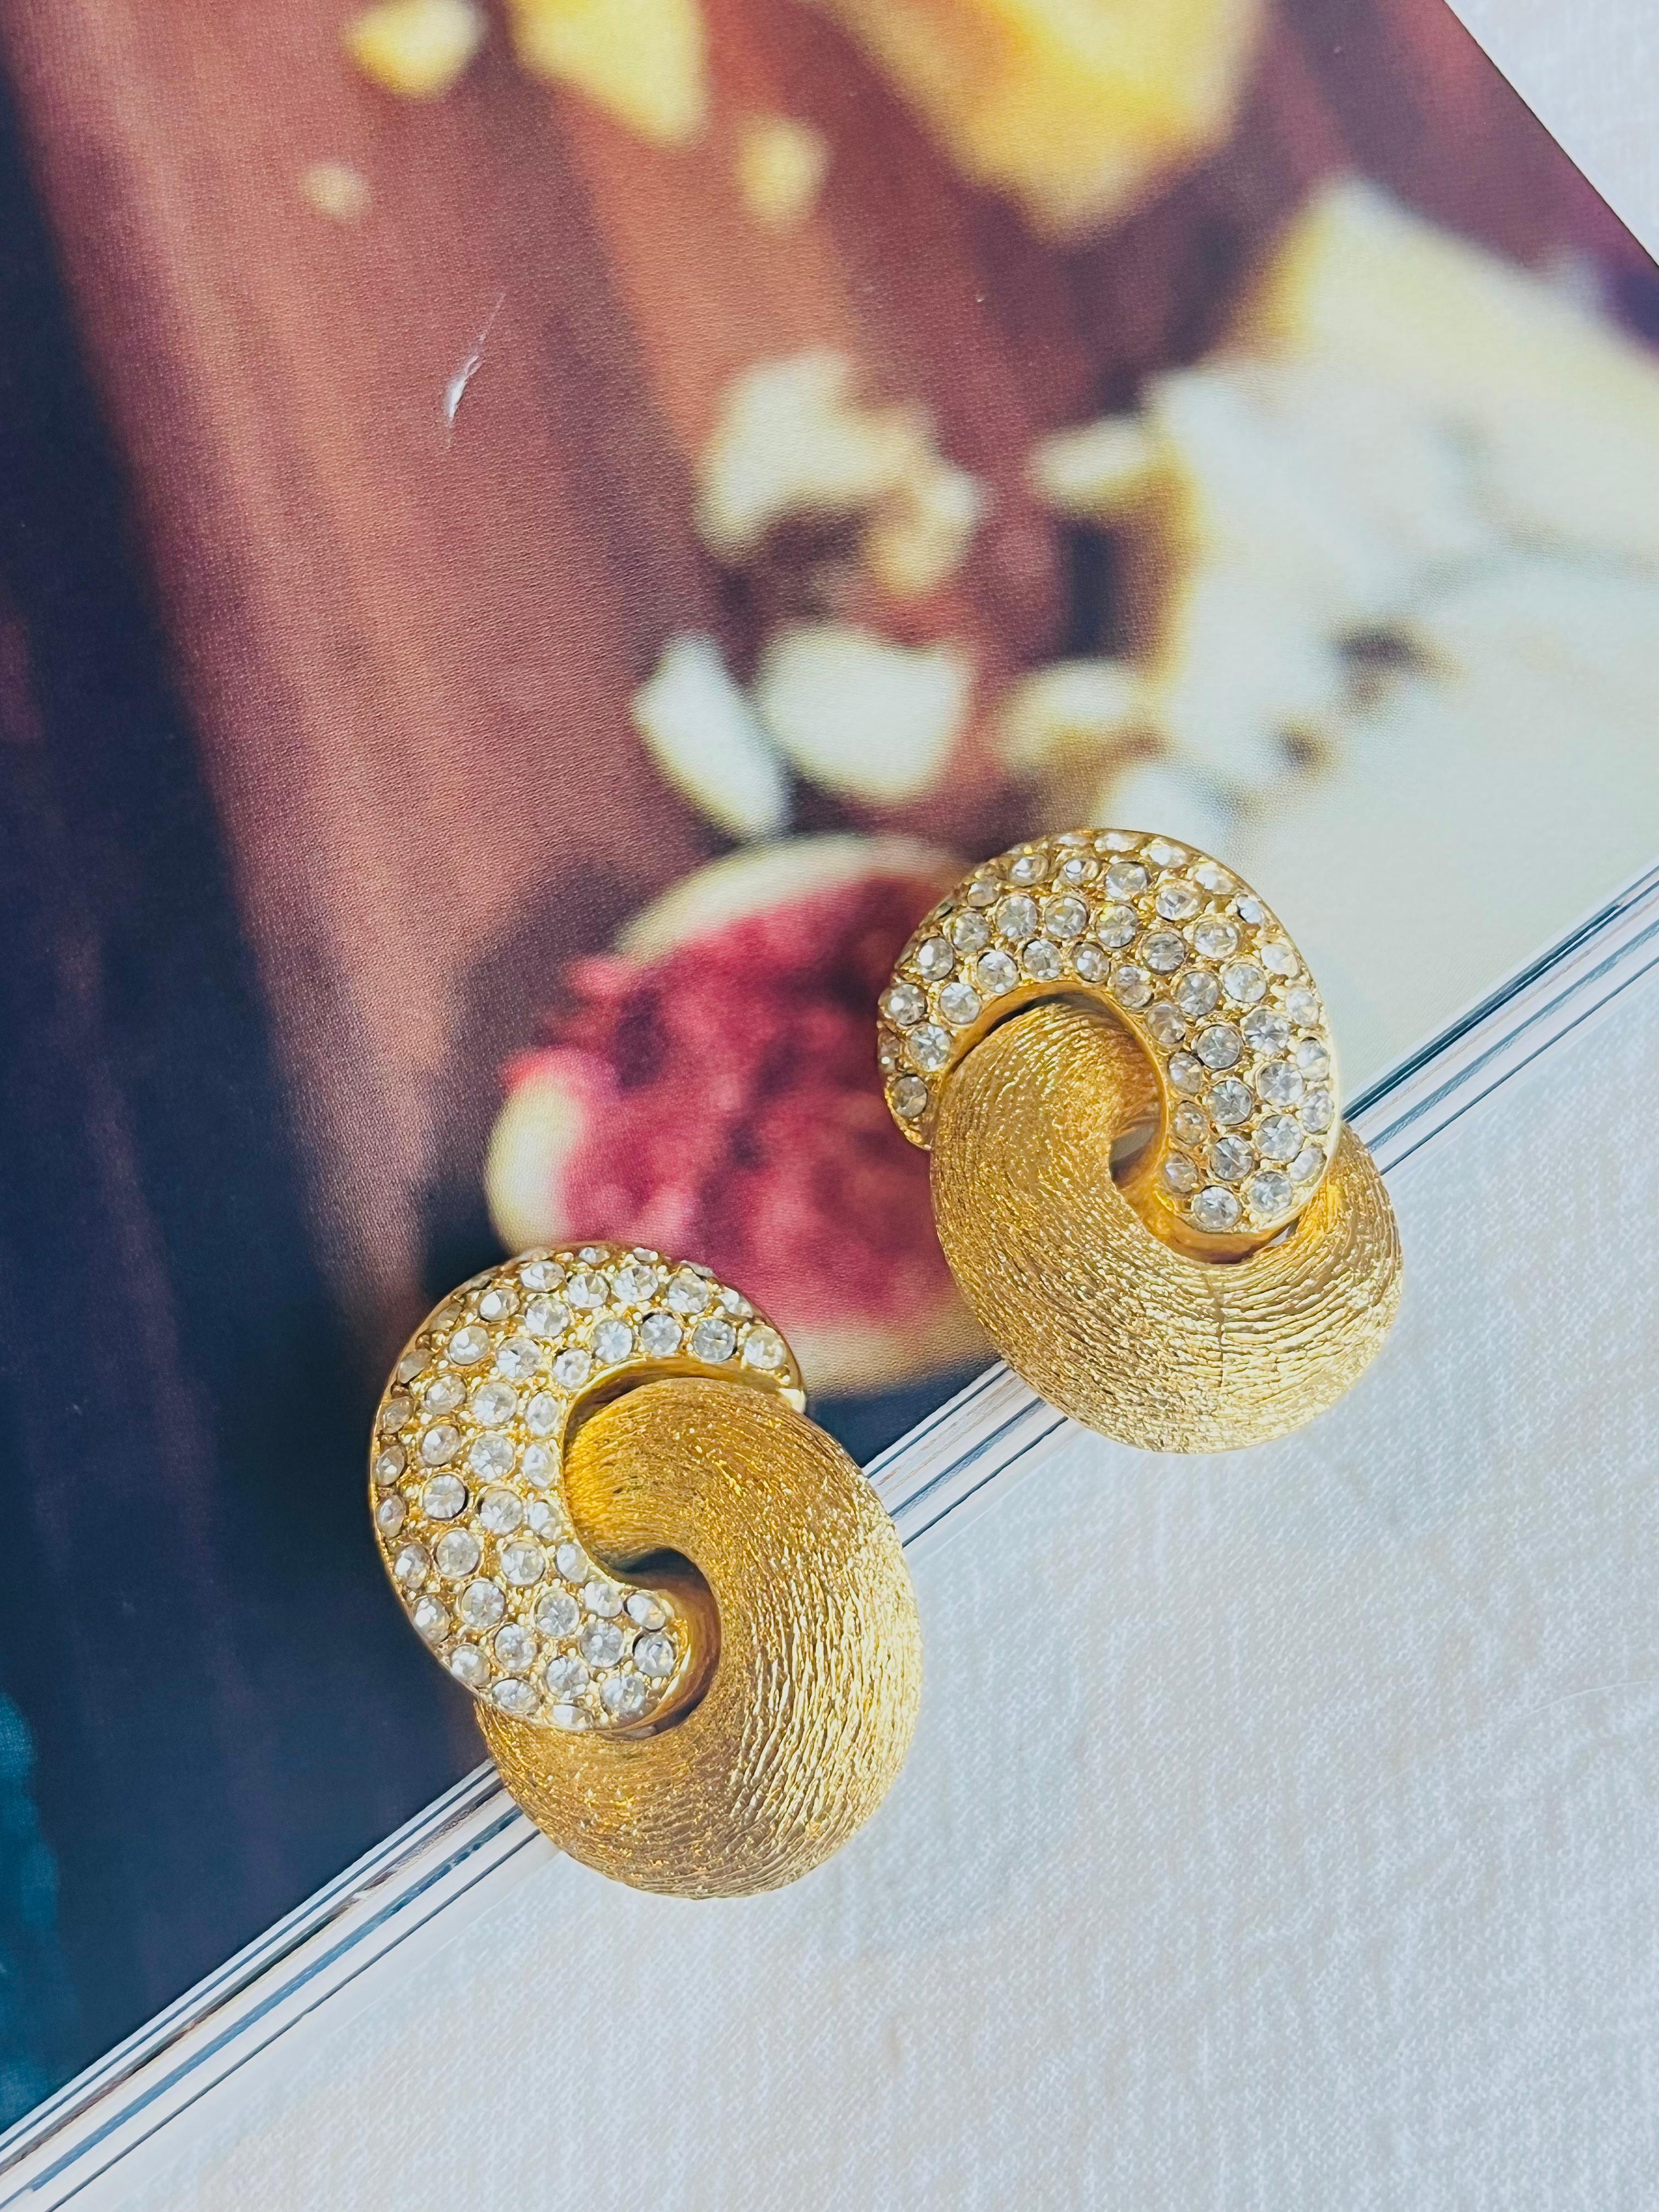 Very good condition. Some light scratches, barely noticeable. 100% Genuine.

A very beautiful pair of earrings by Chr. DIOR, signed at the back.

Size: 3.0*2.2 cm.

Weight: 15.0 g/each.

_ _ _

Great for everyday wear. Come with velvet pouch and